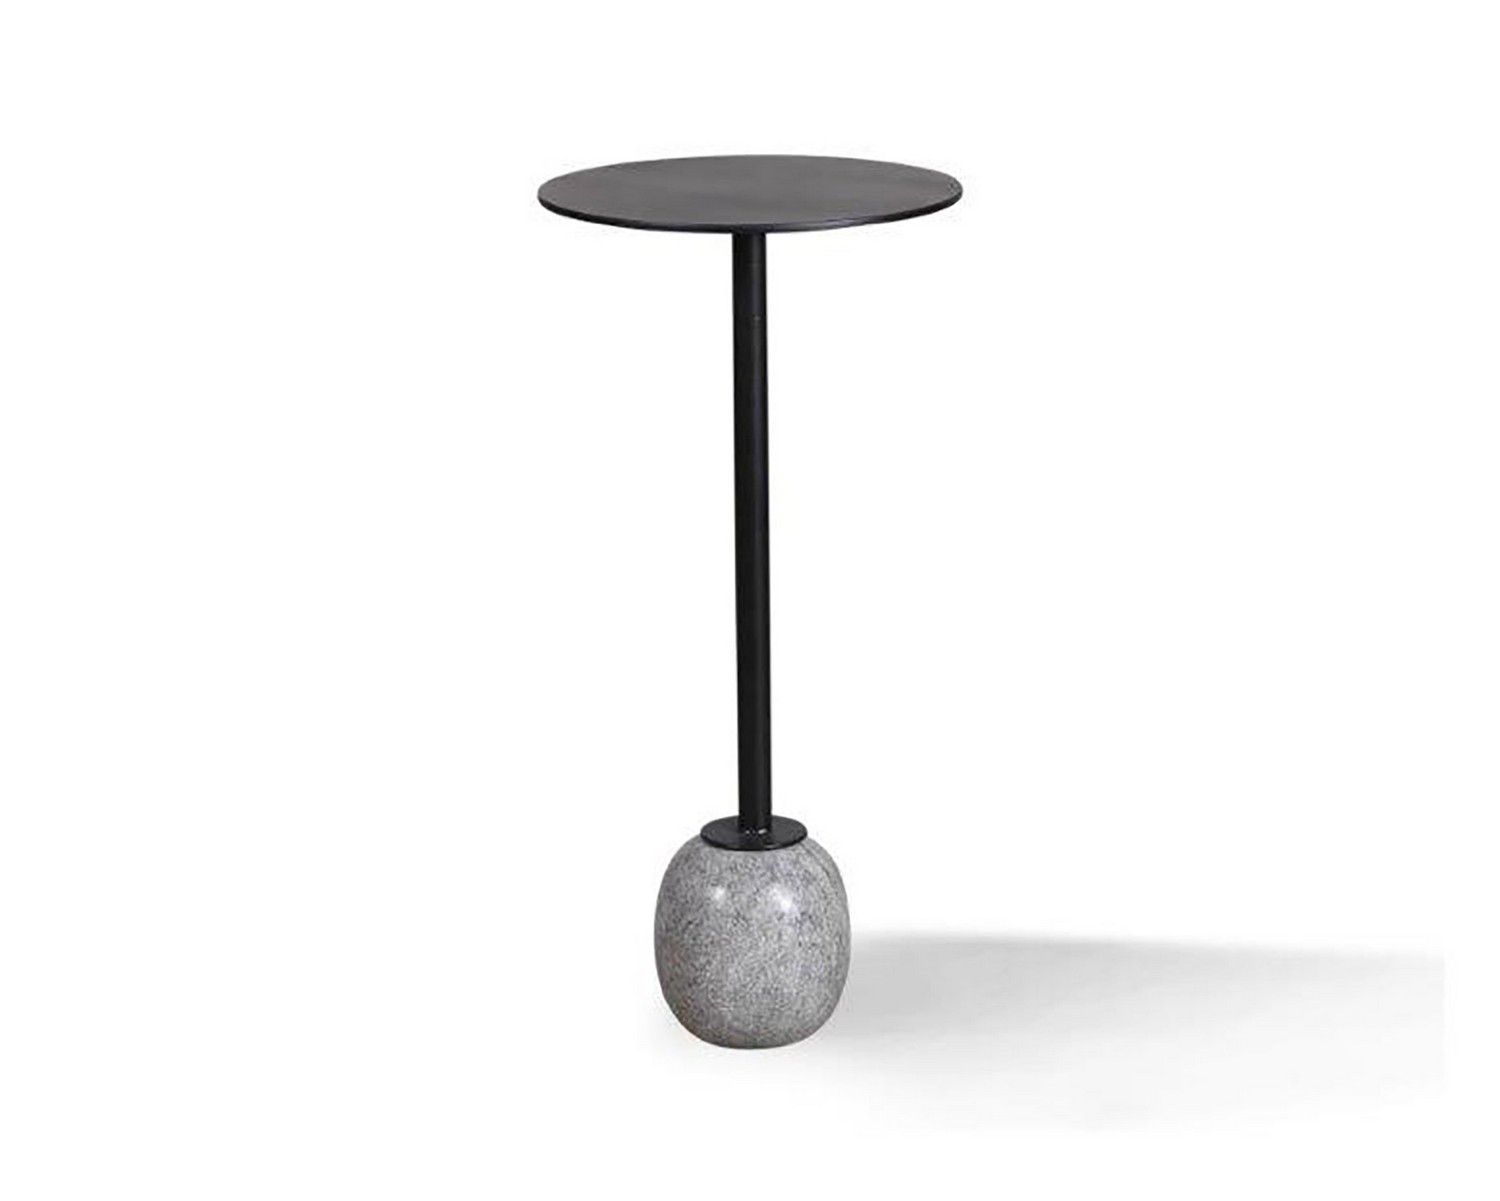 Parker House Crossings Serengeti Accent Table - Iron and Marble